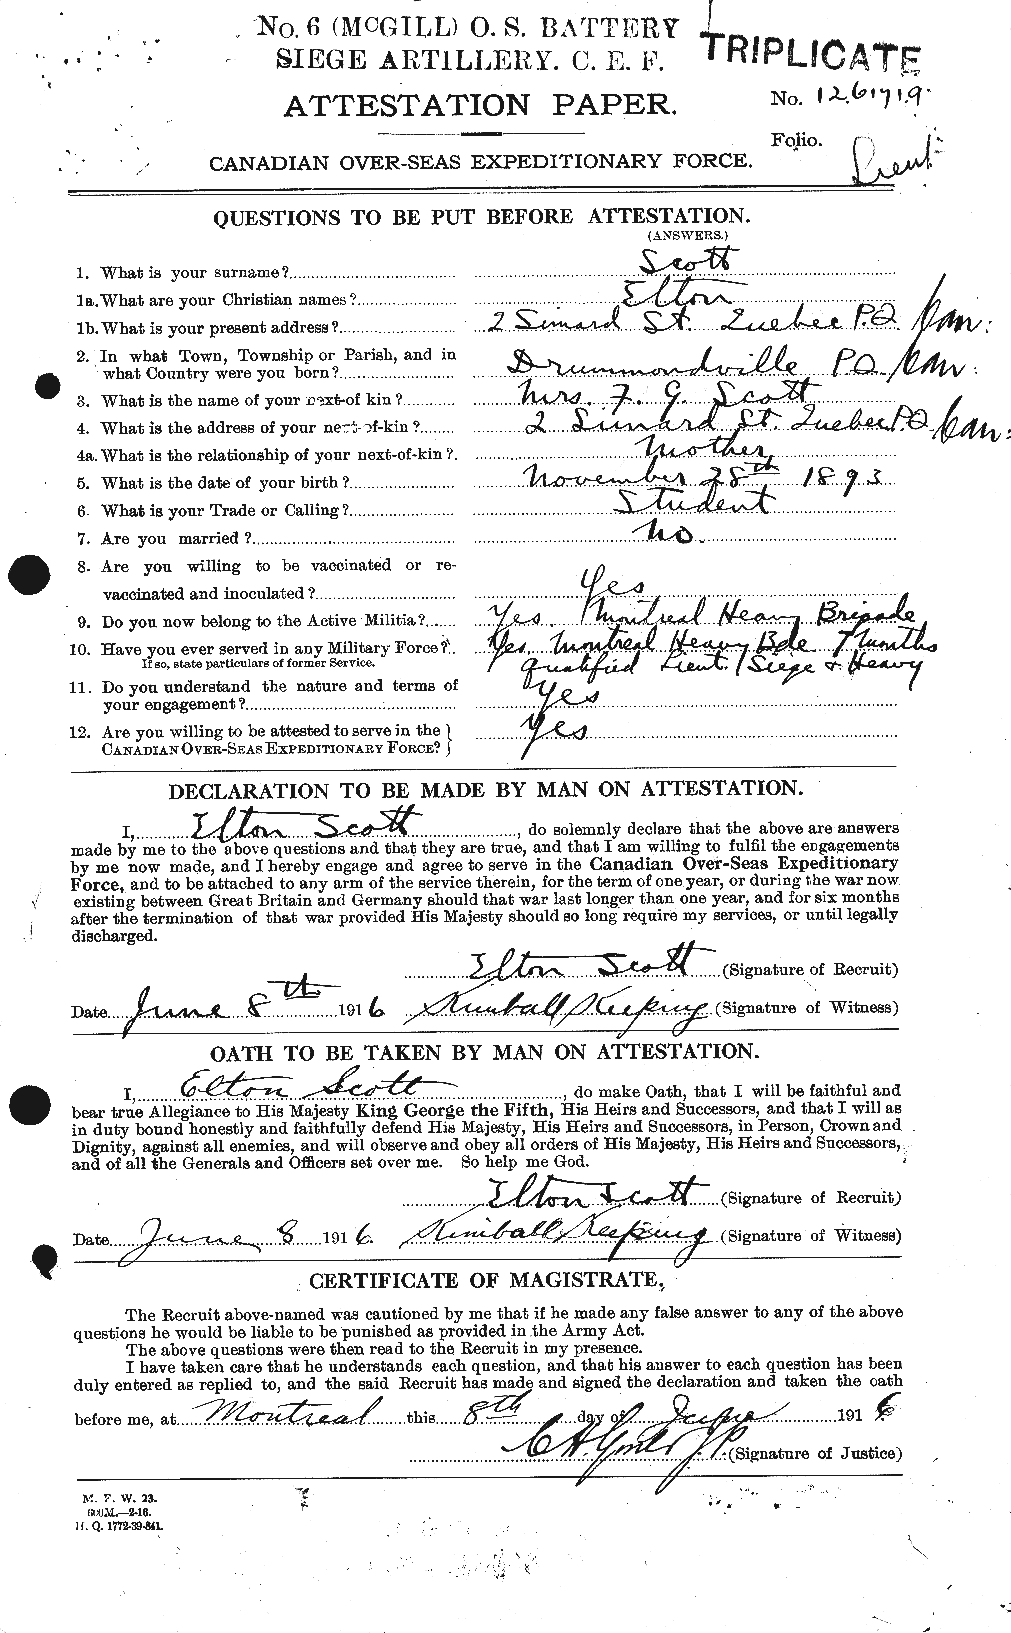 Personnel Records of the First World War - CEF 085031a